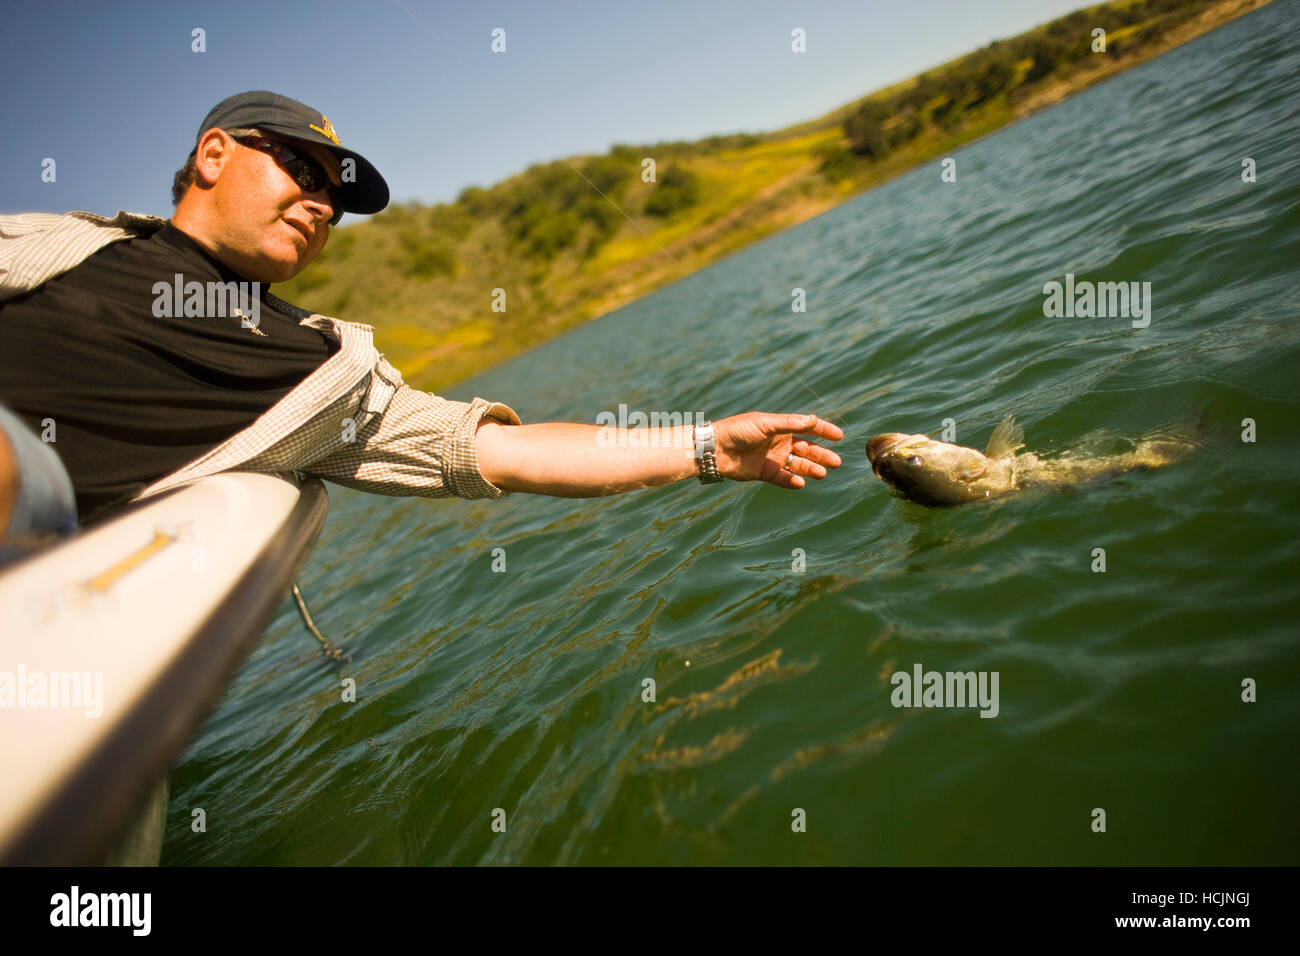 A man leans off the side of a boat and reaches to pull in a hooked fish on a line while bass fishing in Lake Casitas Stock Photo